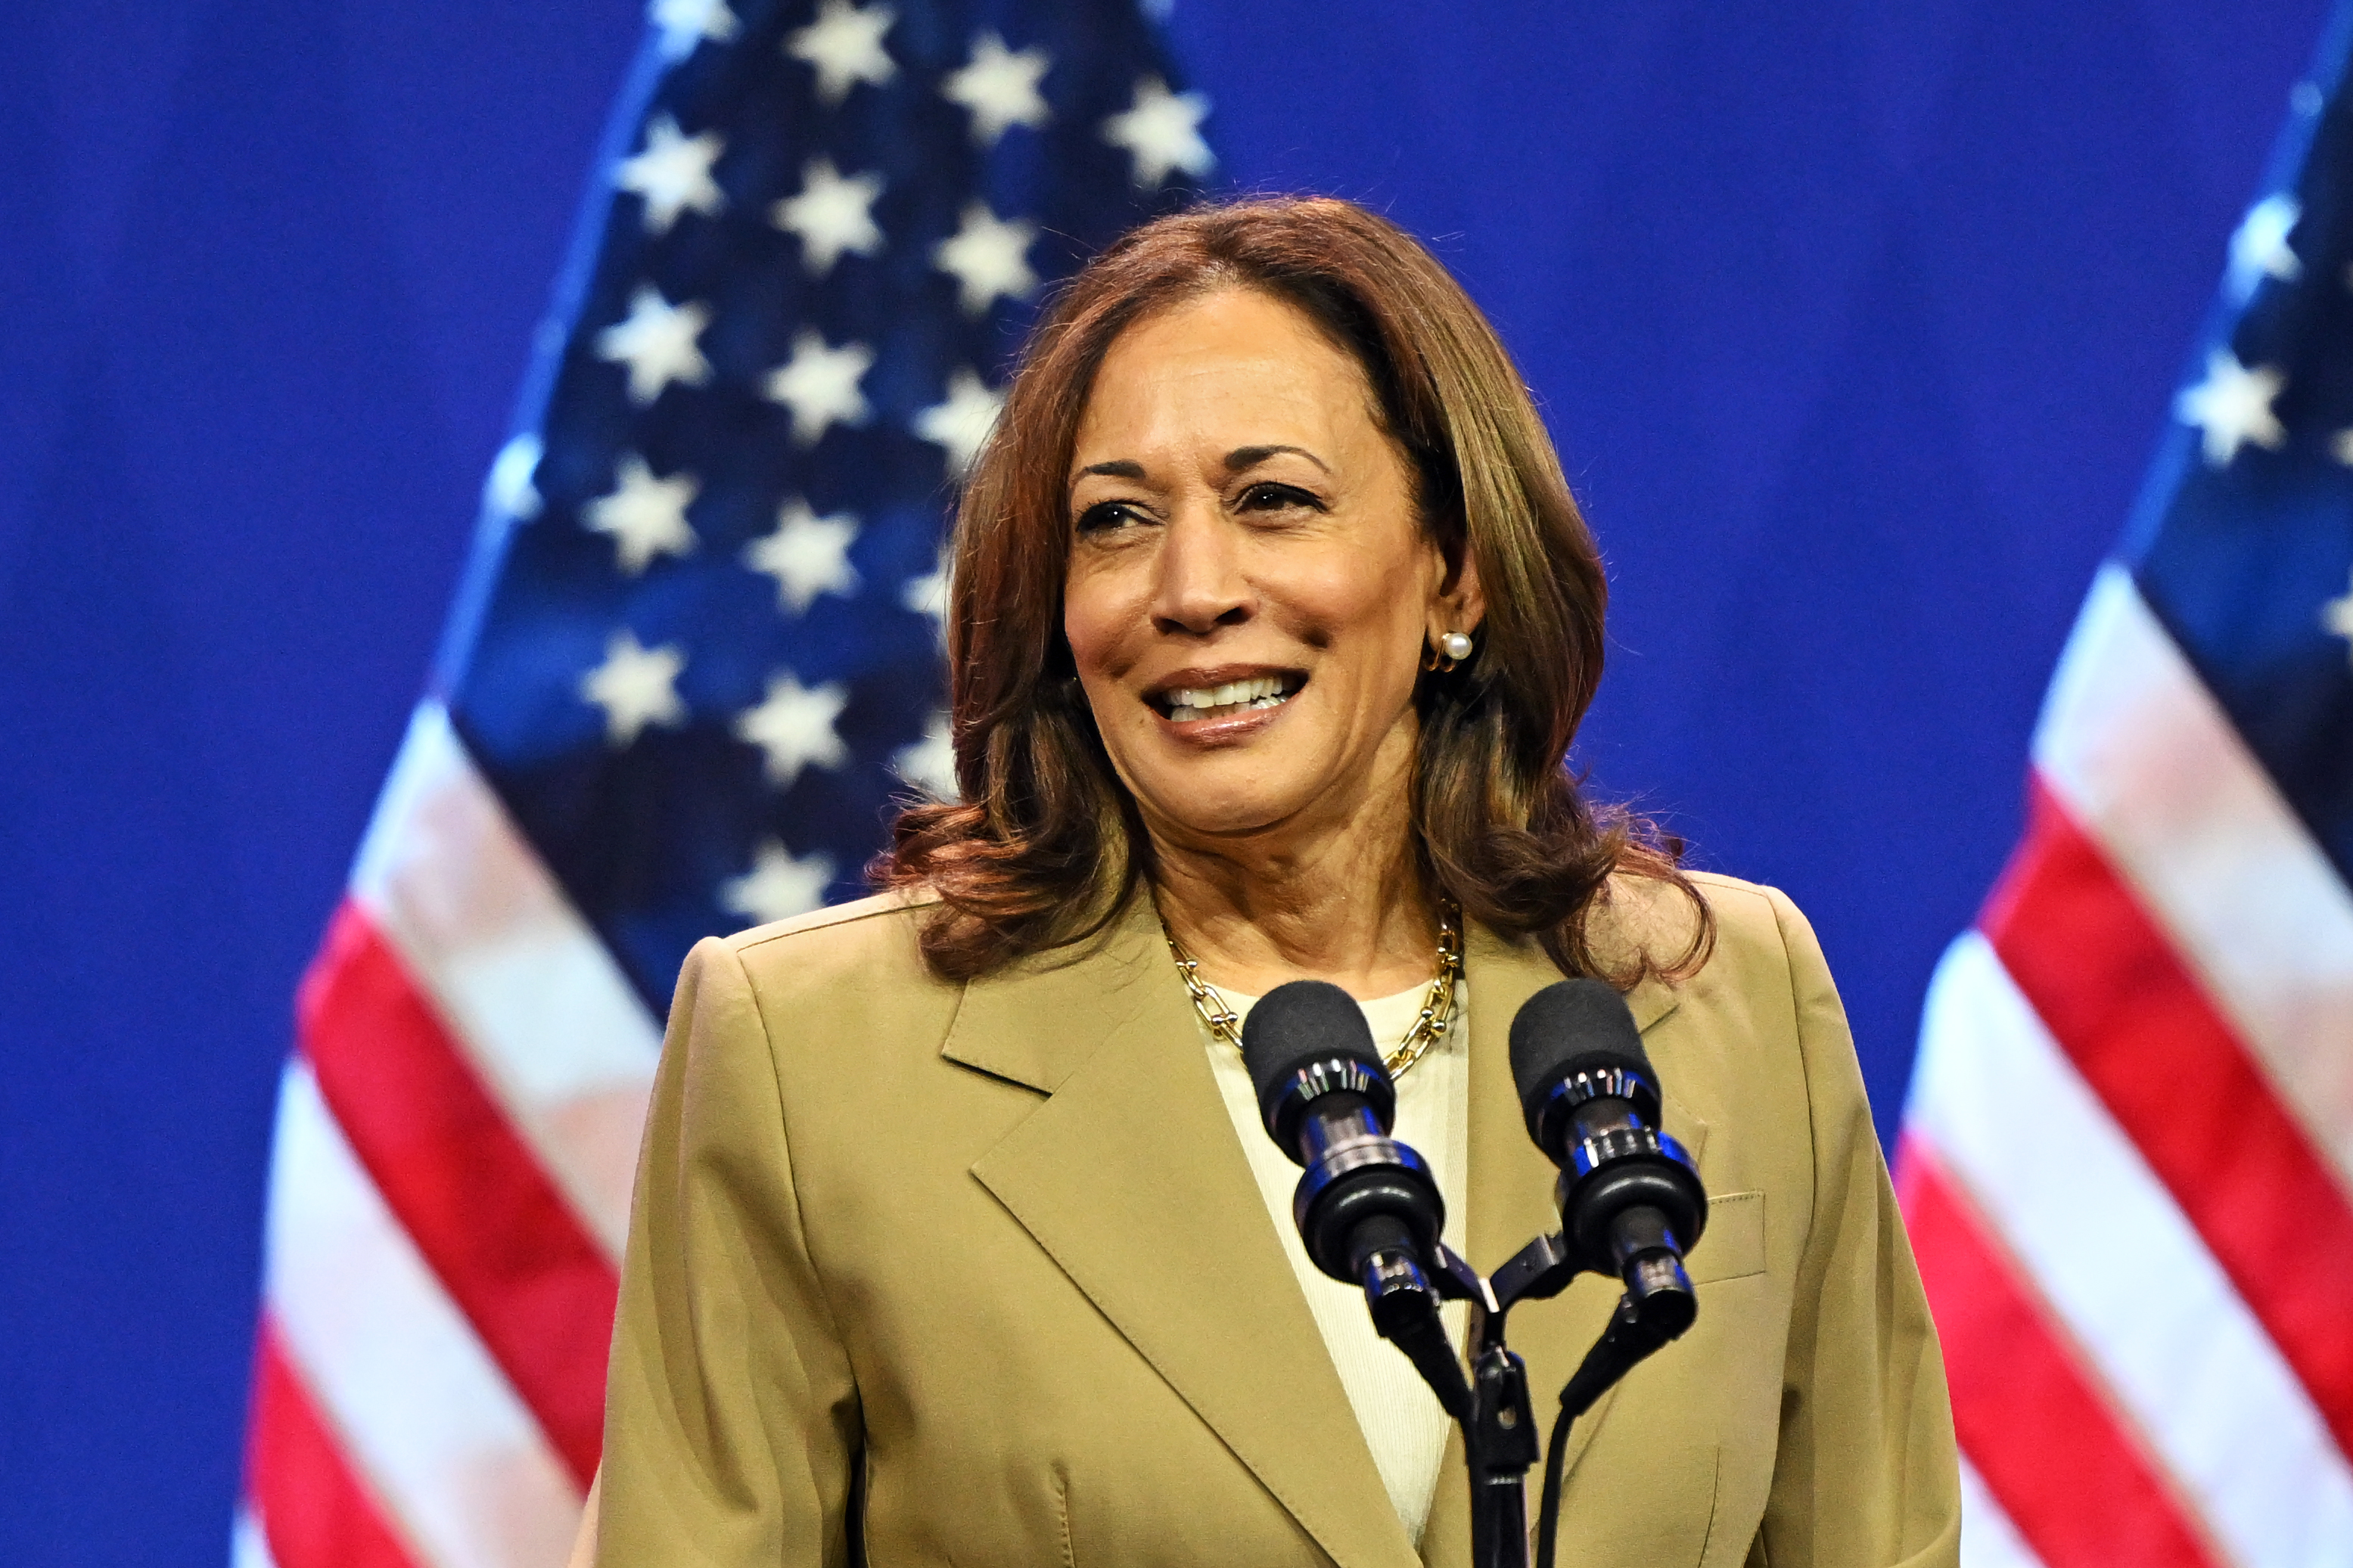 Harris gets to work to become Democratic nominee for president after Biden withdraws